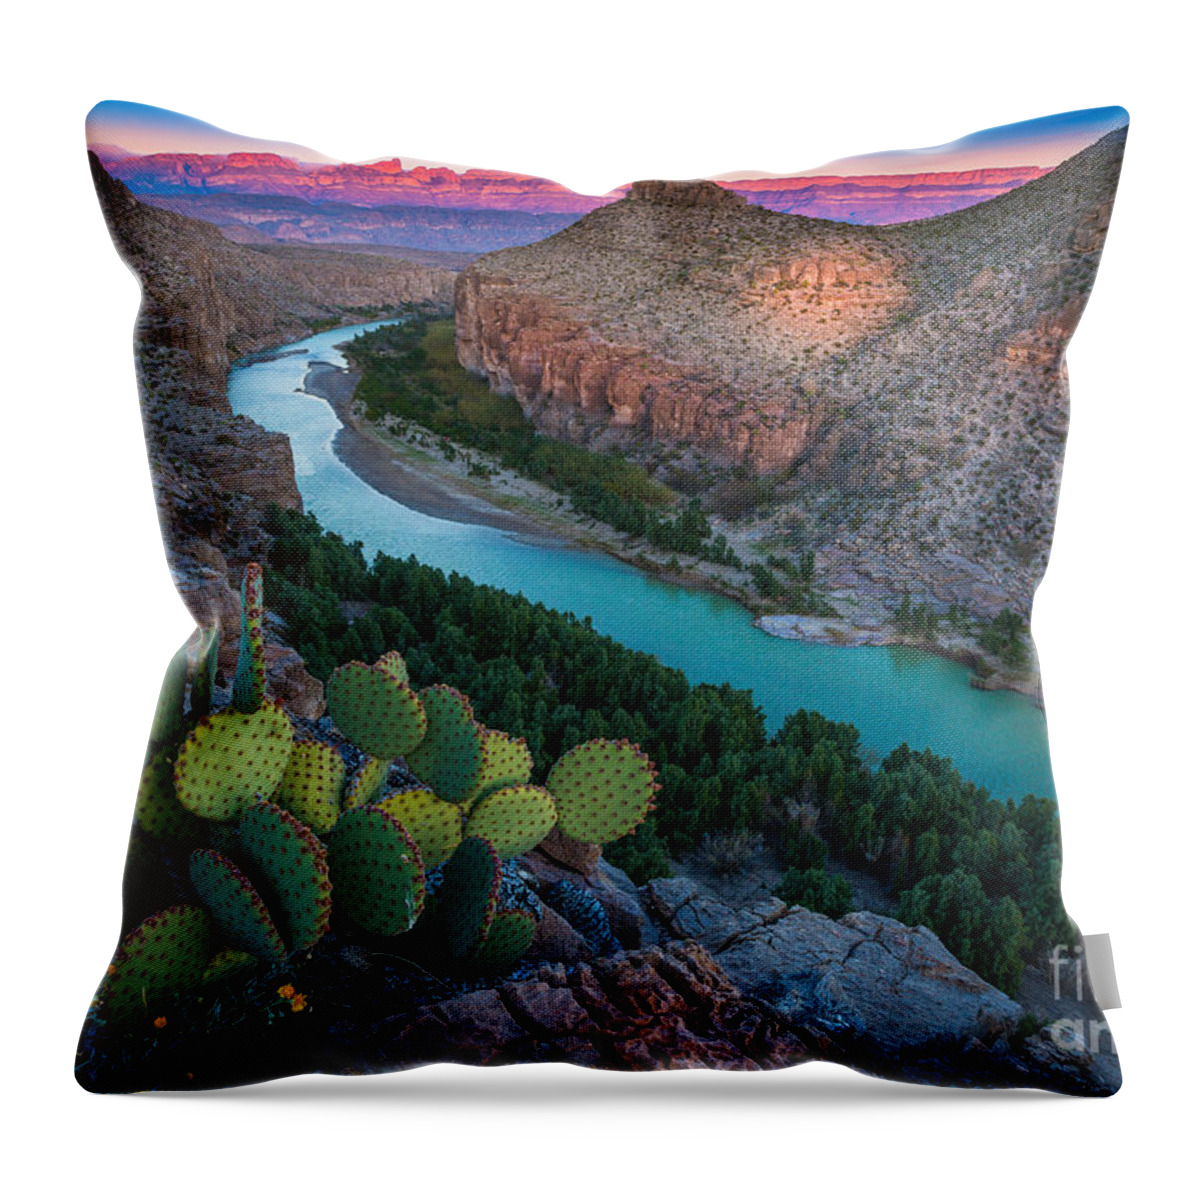 America Throw Pillow featuring the photograph Big Bend Evening by Inge Johnsson